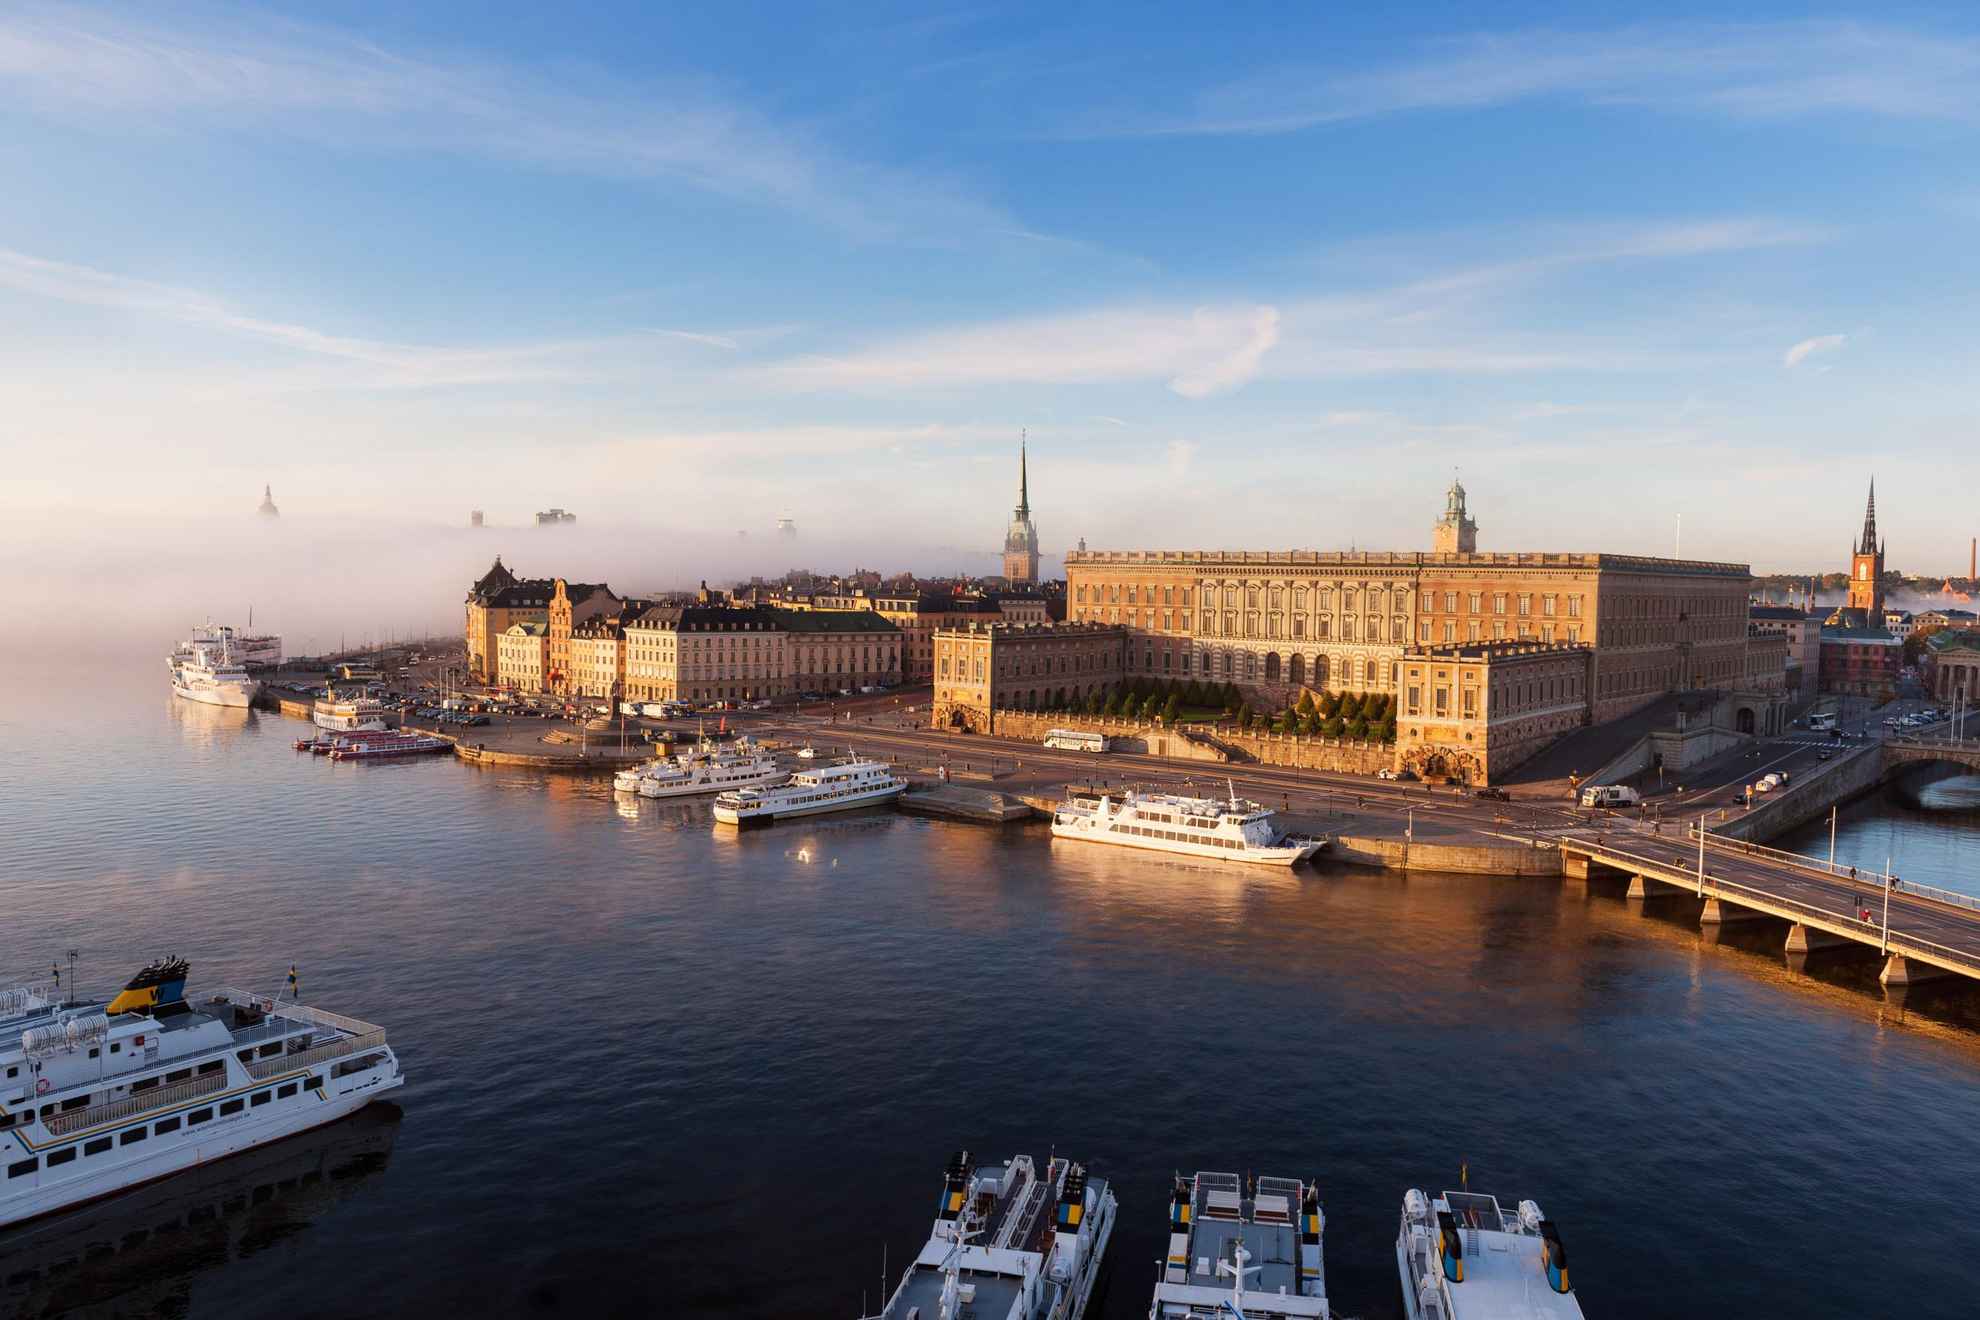 Aerial view over the Royal Palace and other buildings in Stockholm city. Boats are moored along the harbour.